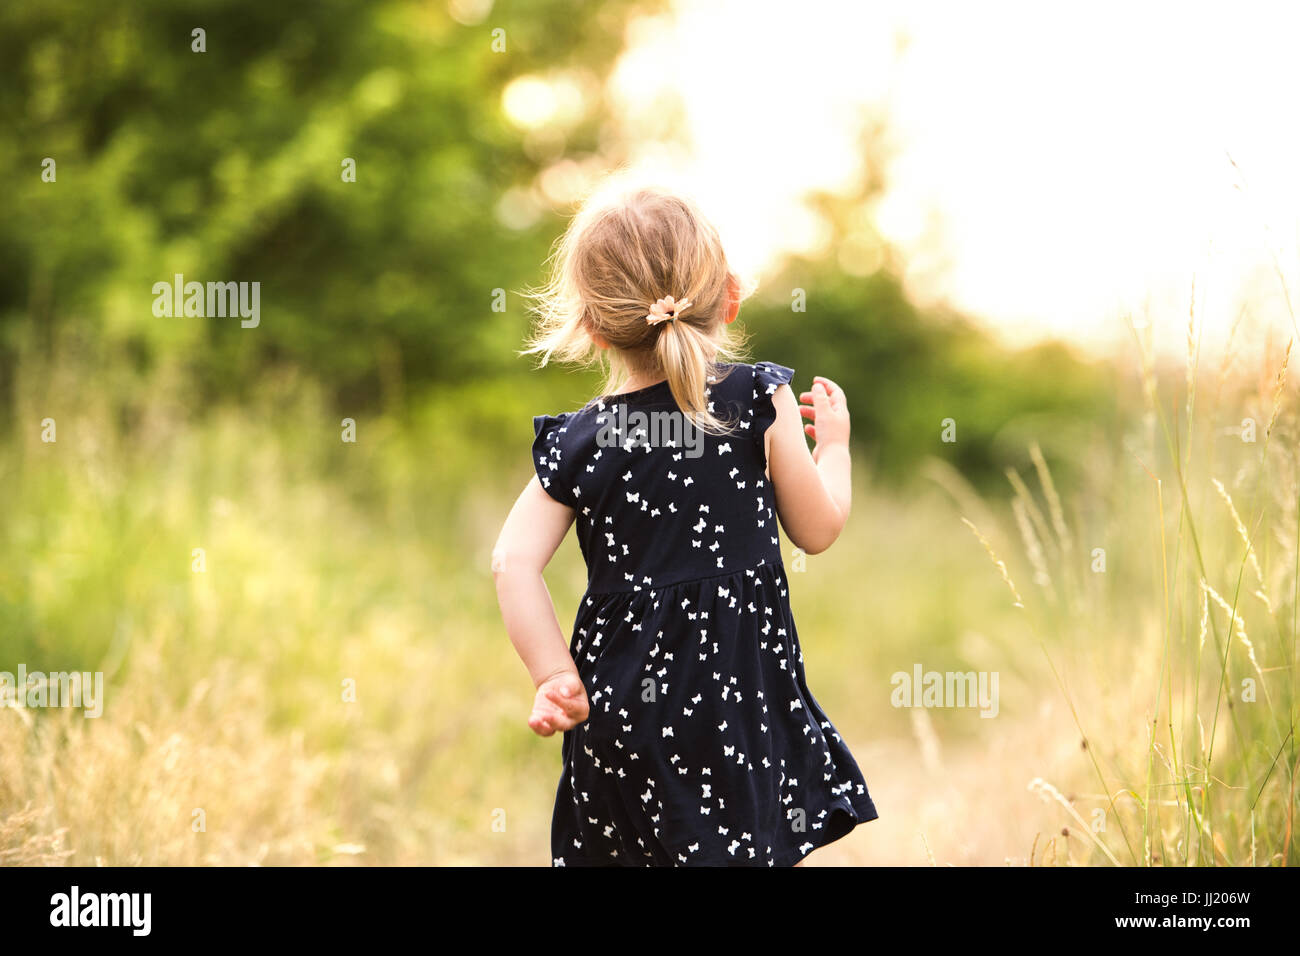 Cute little girl outside in in green sunny summer nature. Stock Photo